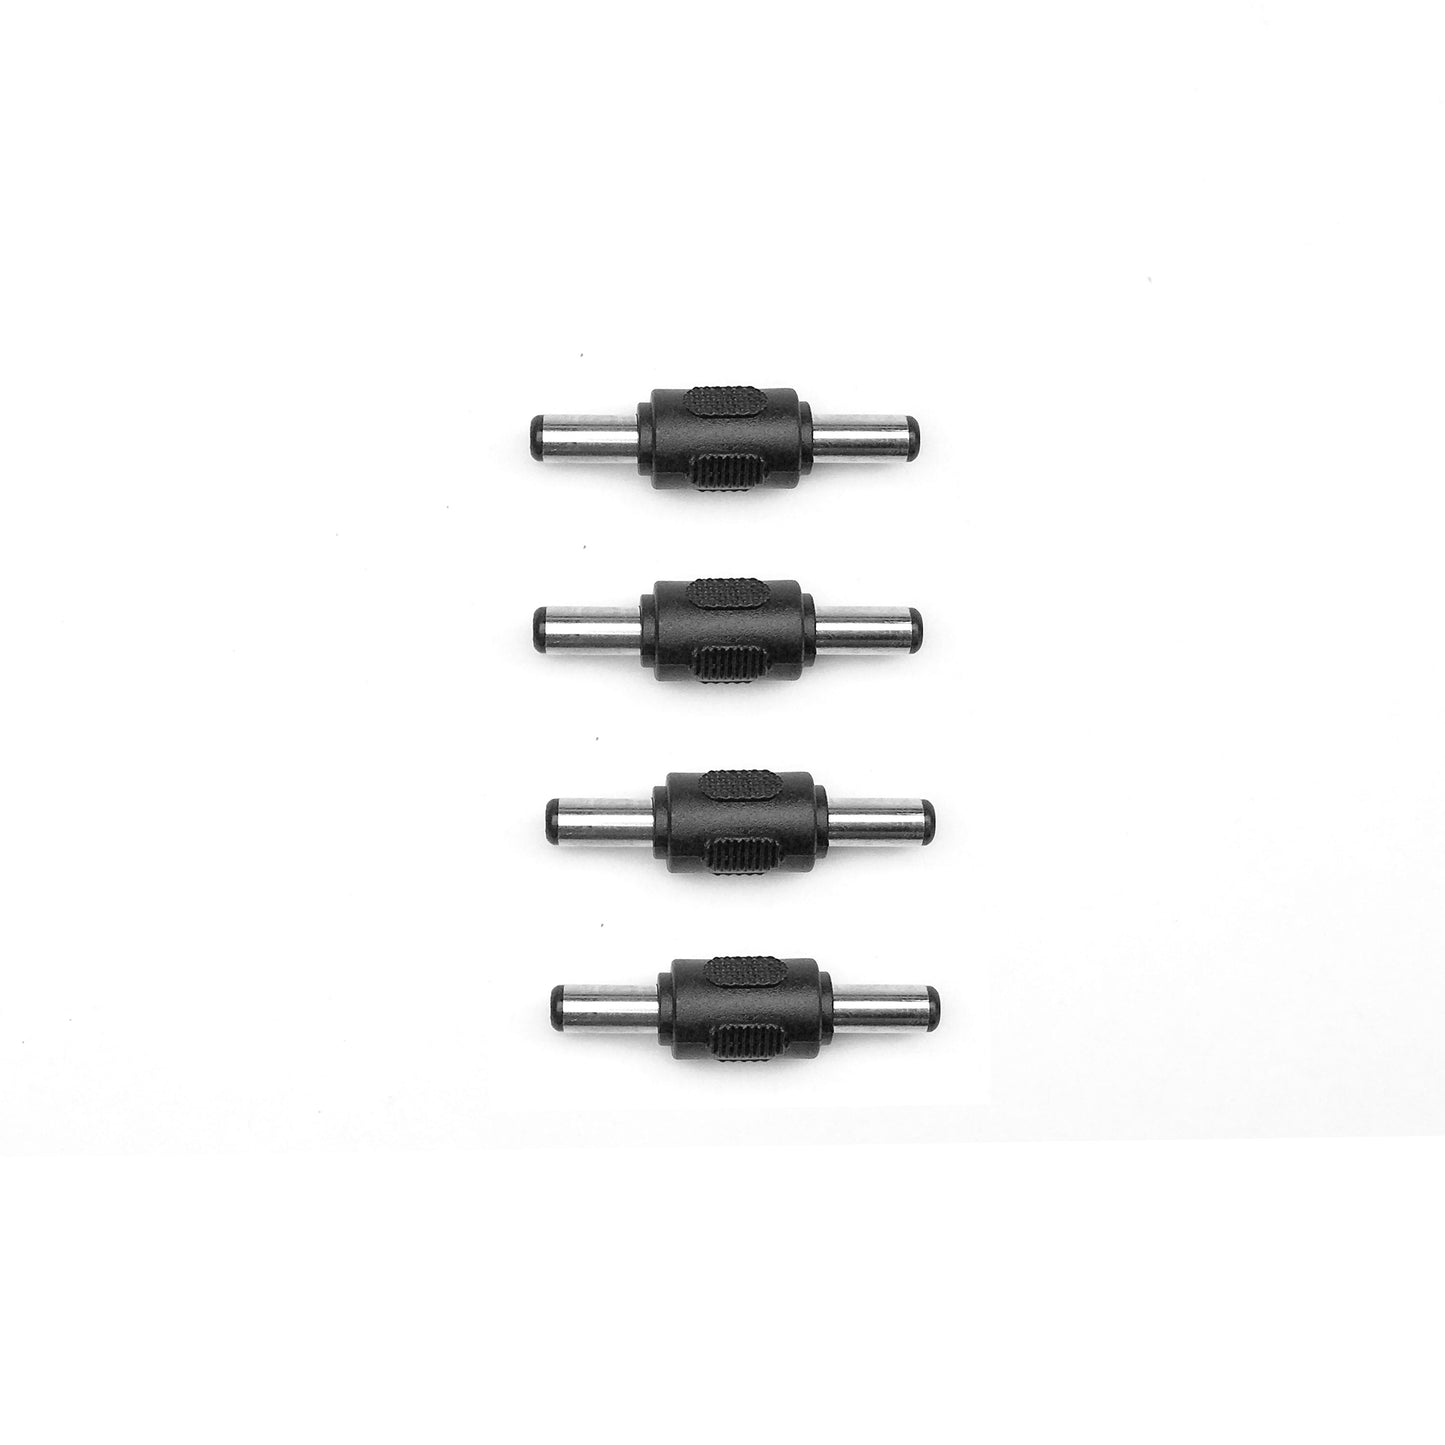 PN 7096 | Daisy-Chain DC Connector for UV LED Strips